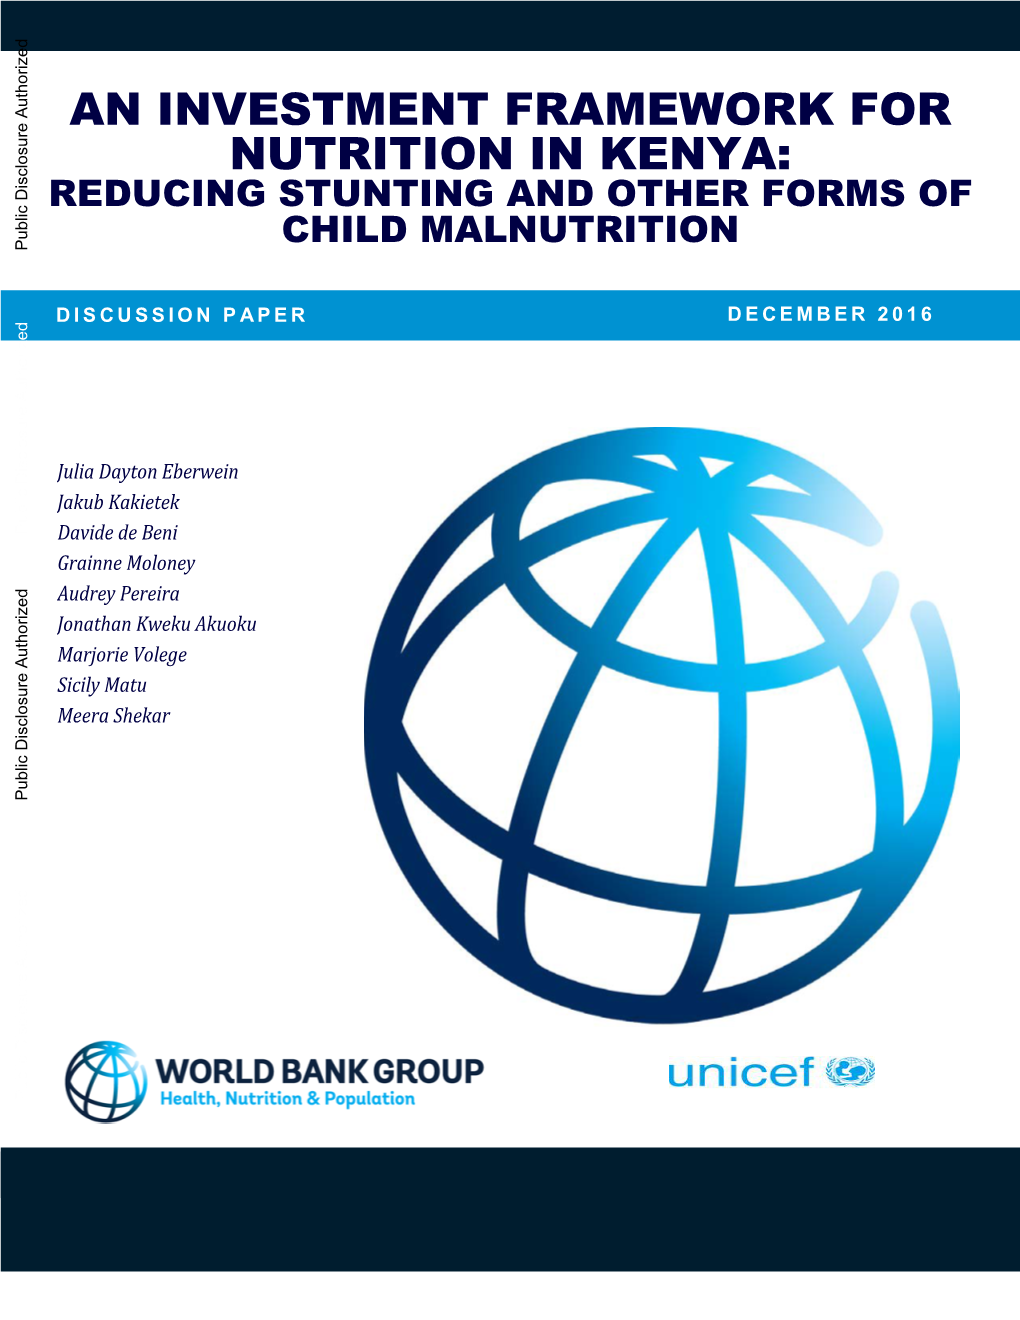 An Investment Framework for Nutrition in Kenya: Reducing Stunting and Other Forms Of